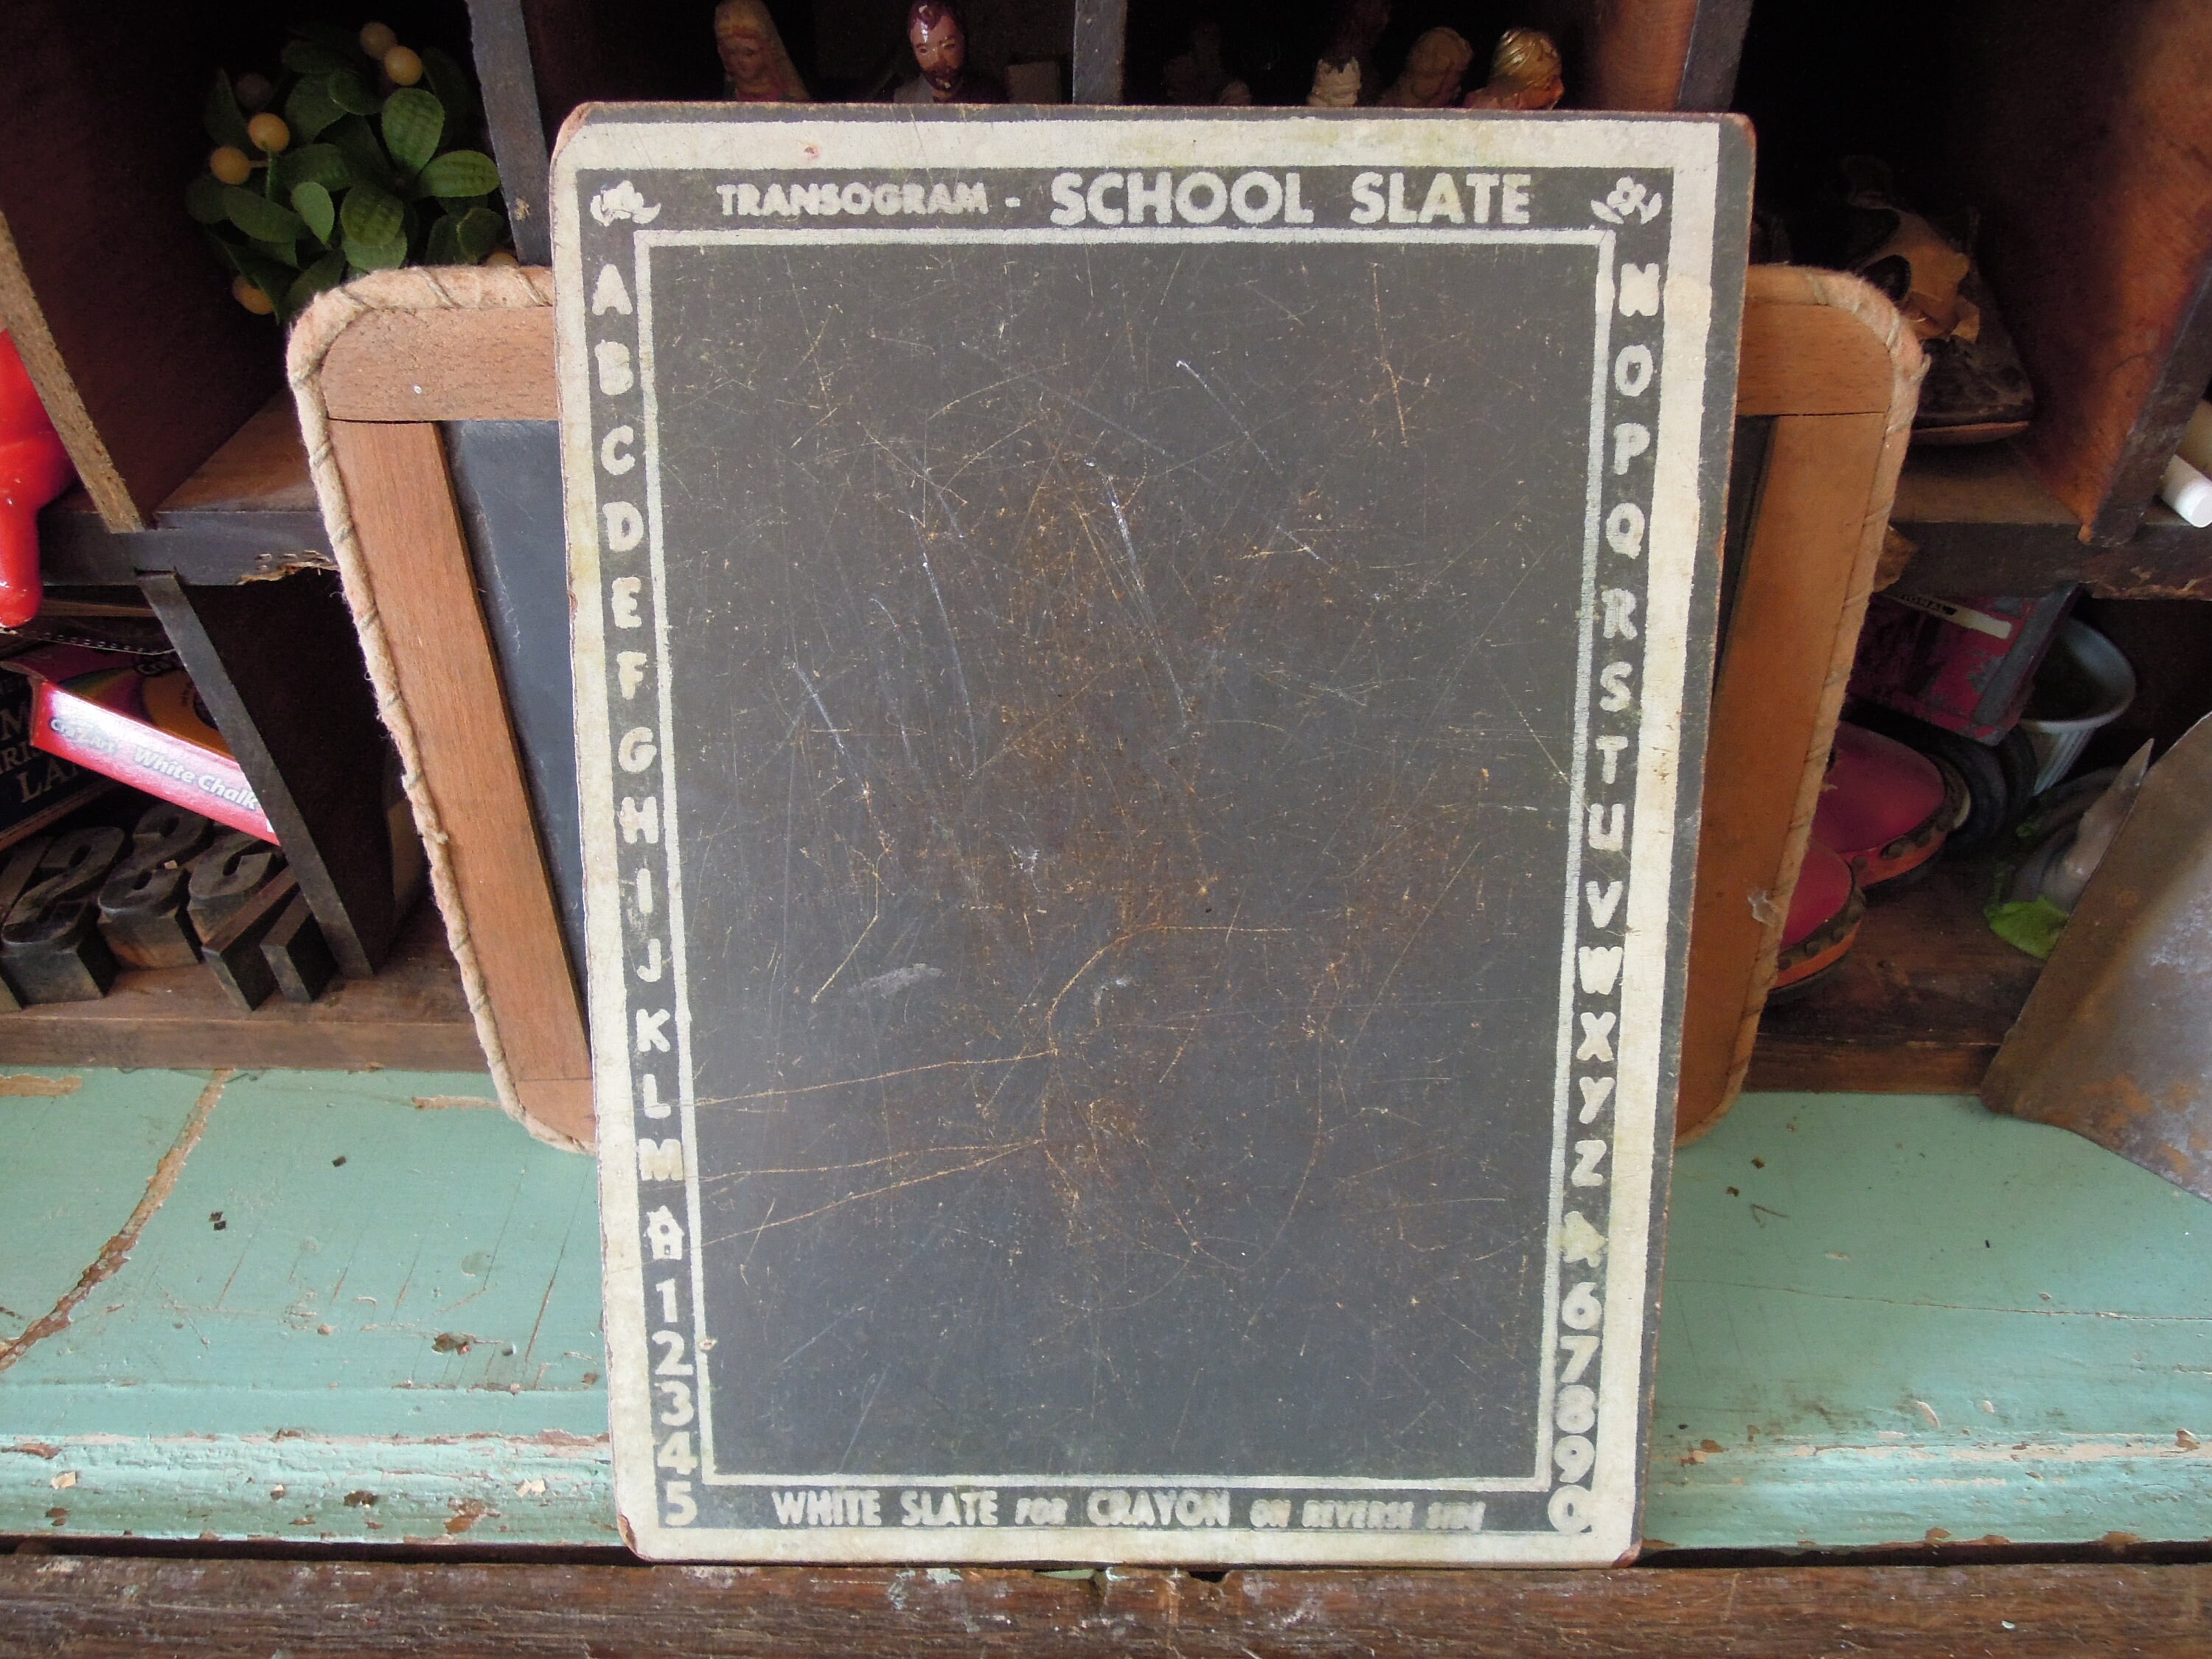 Vintage Amaco Colored Chalk Blackboard Crayon Tins With Red and Black Chalk  Vintage School Art Class Decor Two Available 